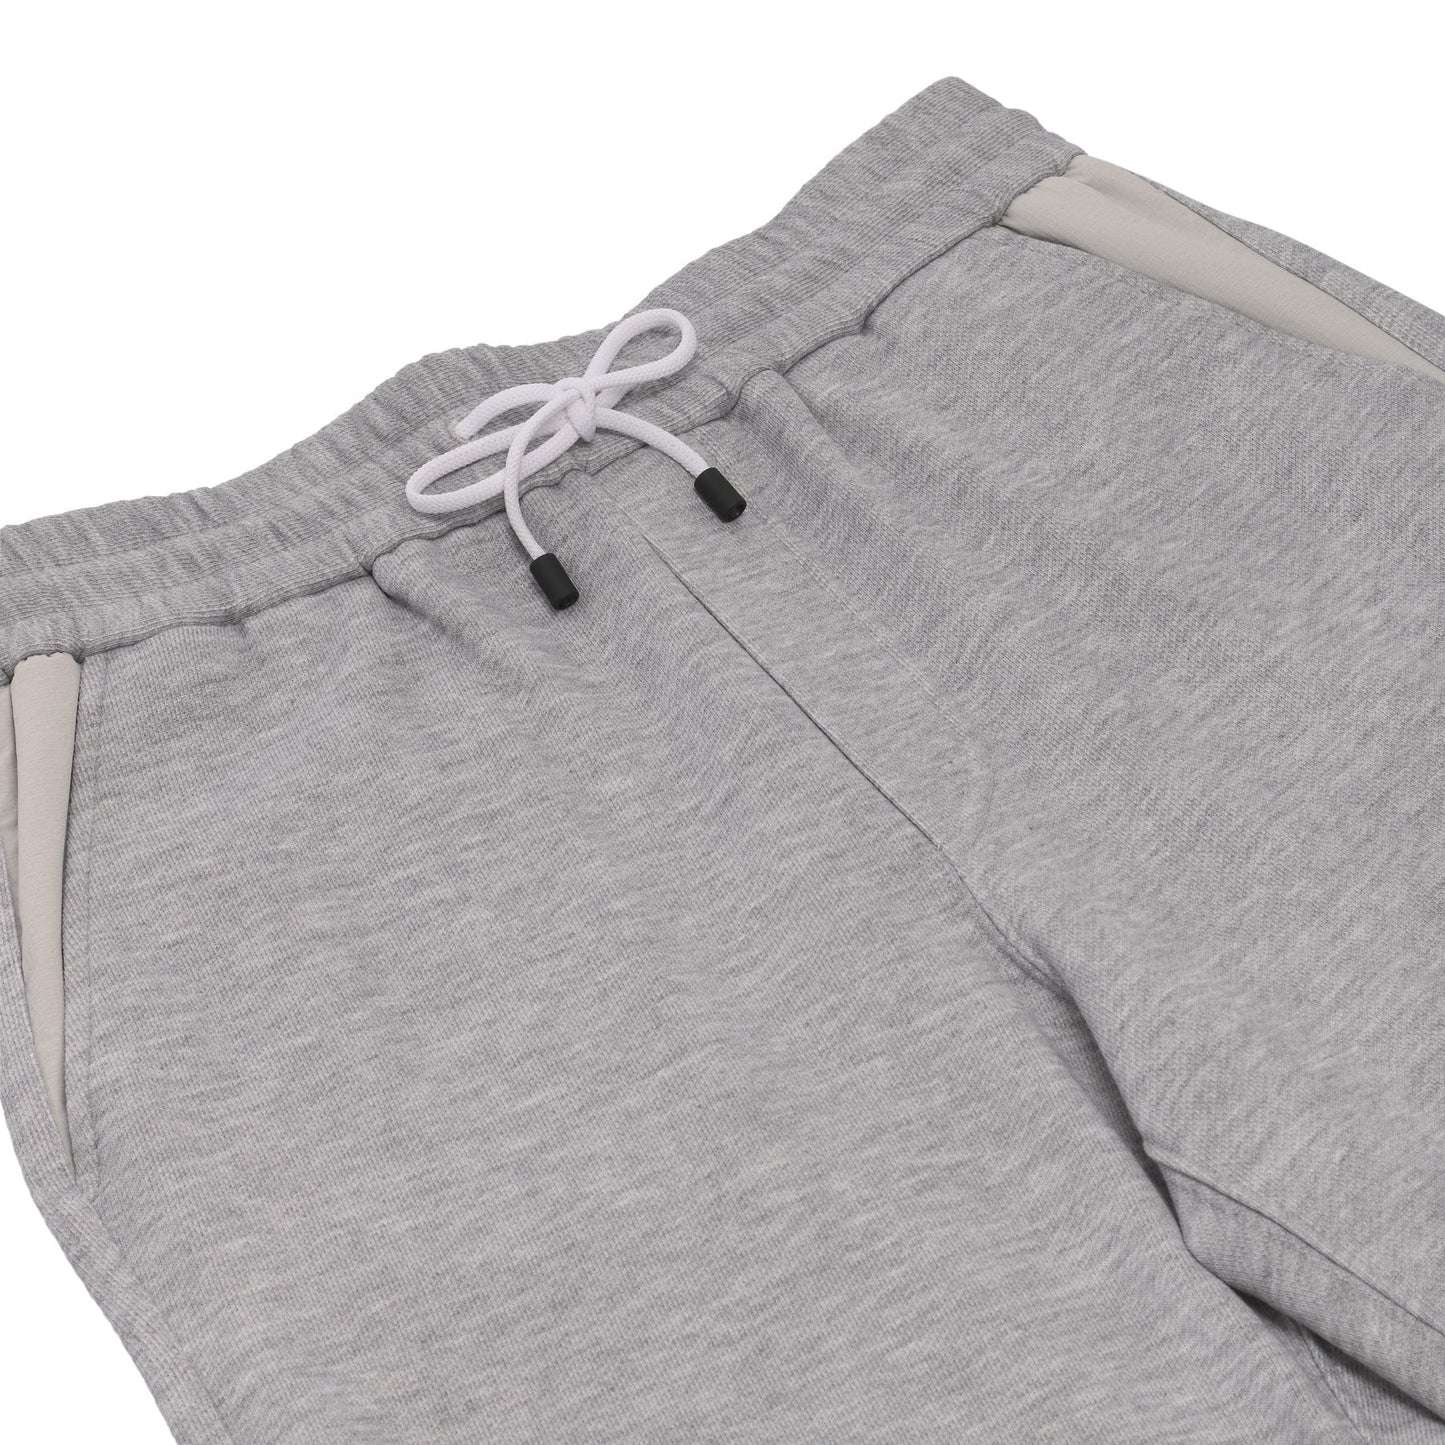 Kiton Logo-Embroidered Jersey Sweatpants in Light Grey - SARTALE